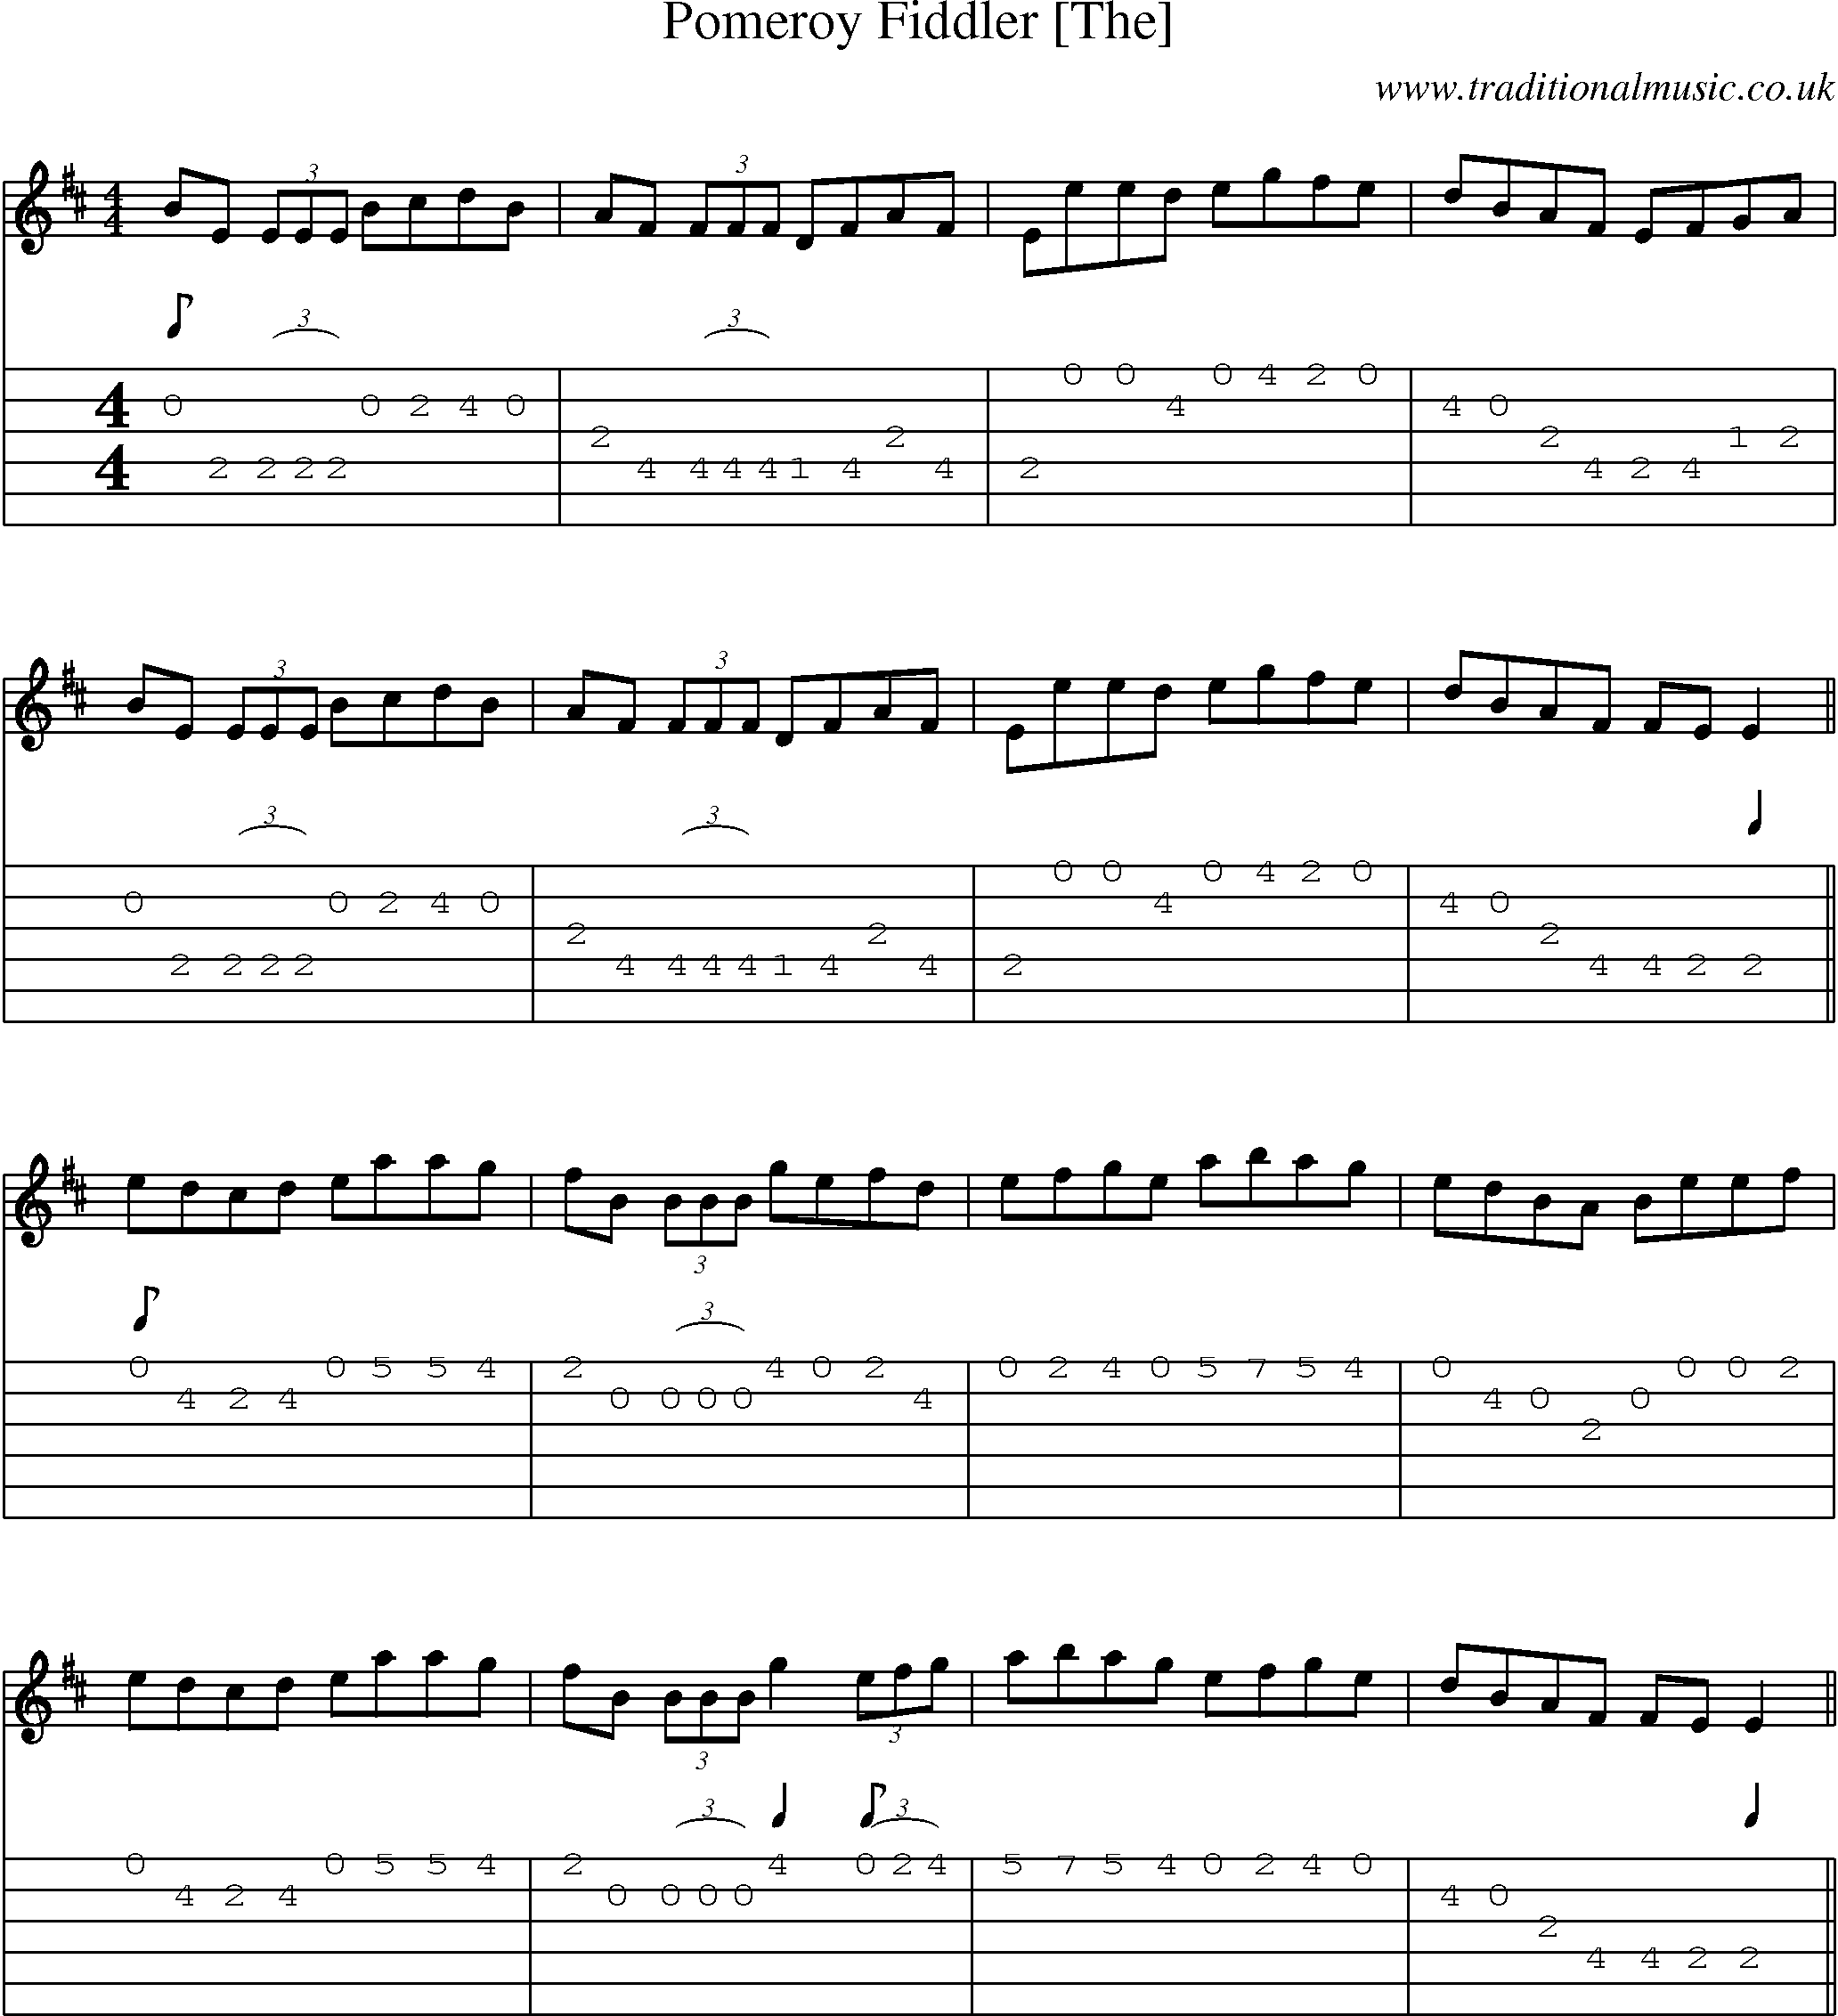 Music Score and Guitar Tabs for Pomeroy Fiddler